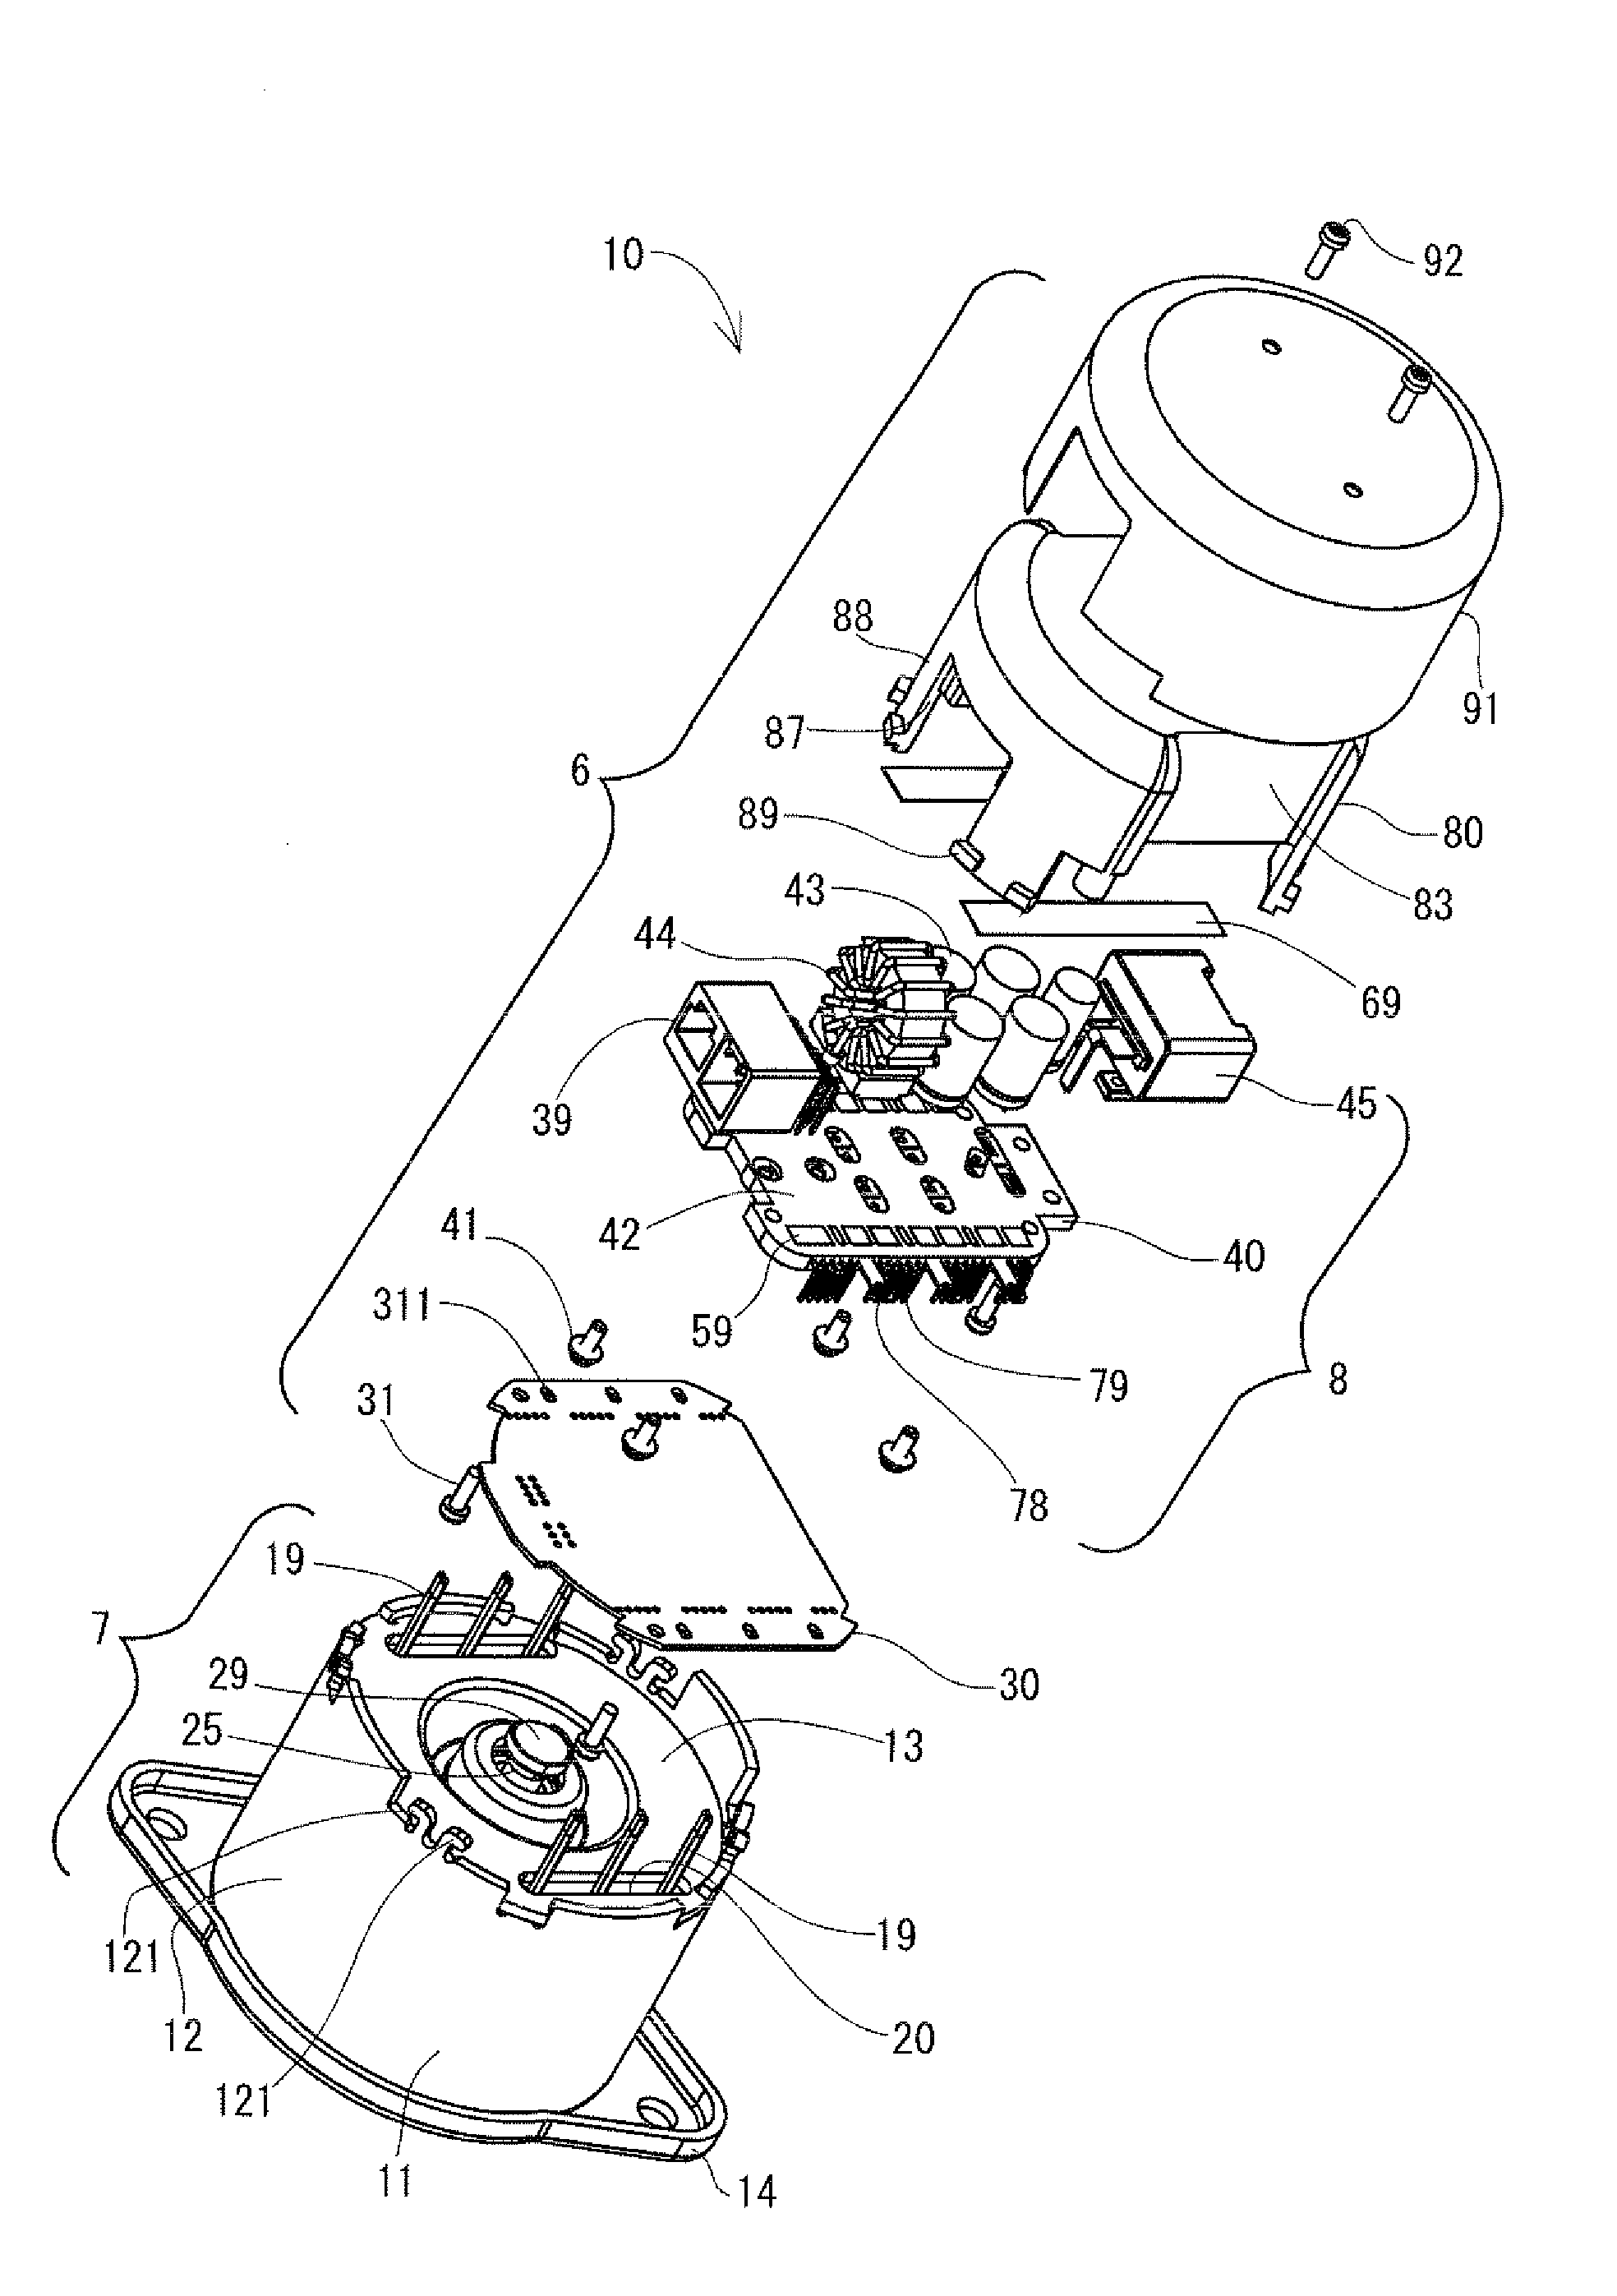 Drive unit of electric motor and motorized equipment using the drive unit